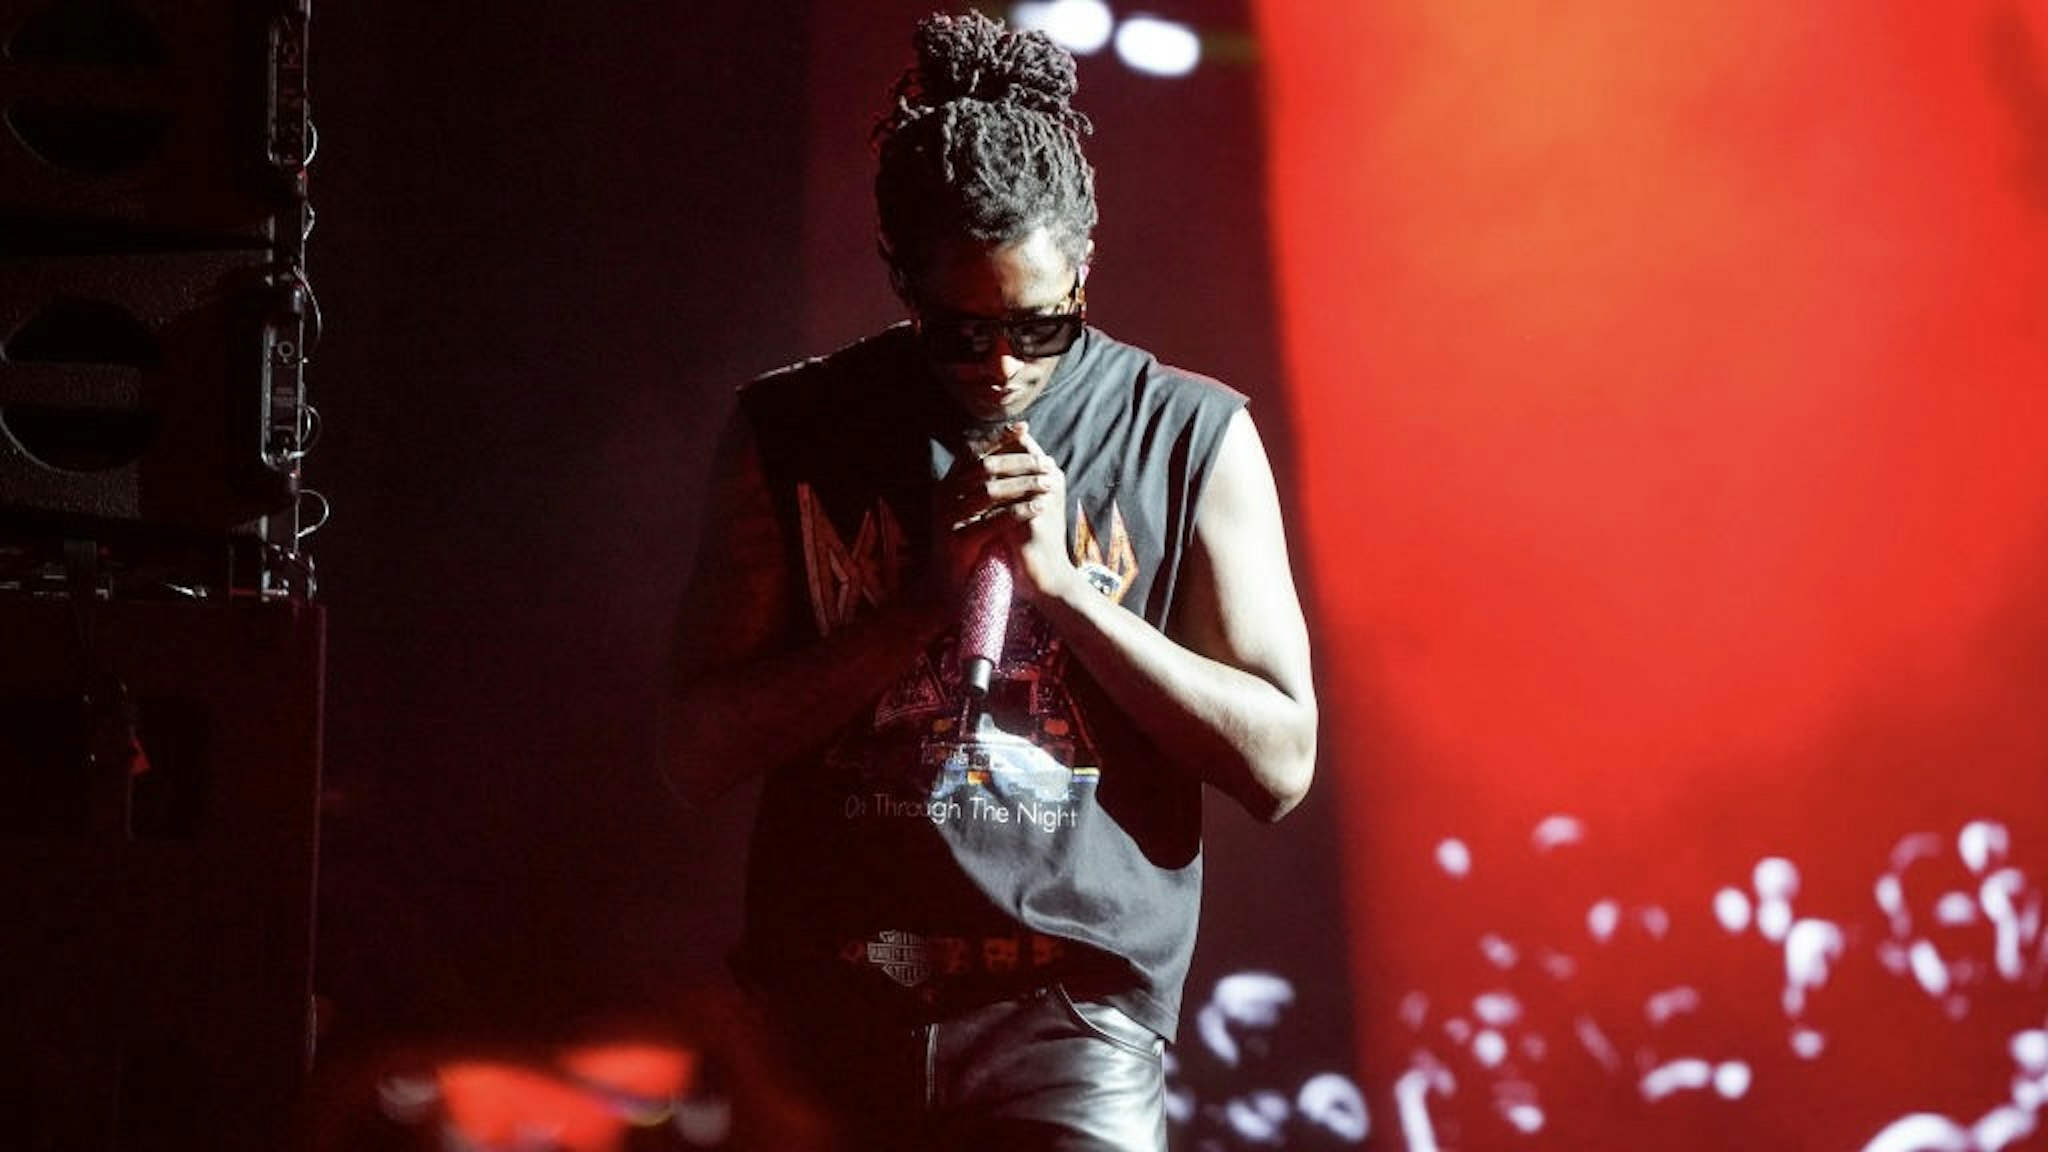 Samsung Galaxy + Billboard - 2022 SXSW Conference and Festivals AUSTIN, TEXAS - MARCH 17: Young Thug performs onstage at 'Samsung Galaxy + Billboard' during the 2022 SXSW Conference and Festivals at Waterloo Park on March 17, 2022 in Austin, Texas. (Photo by Amy E. Price/Getty Images for SXSW) Amy E. Price / Contributor